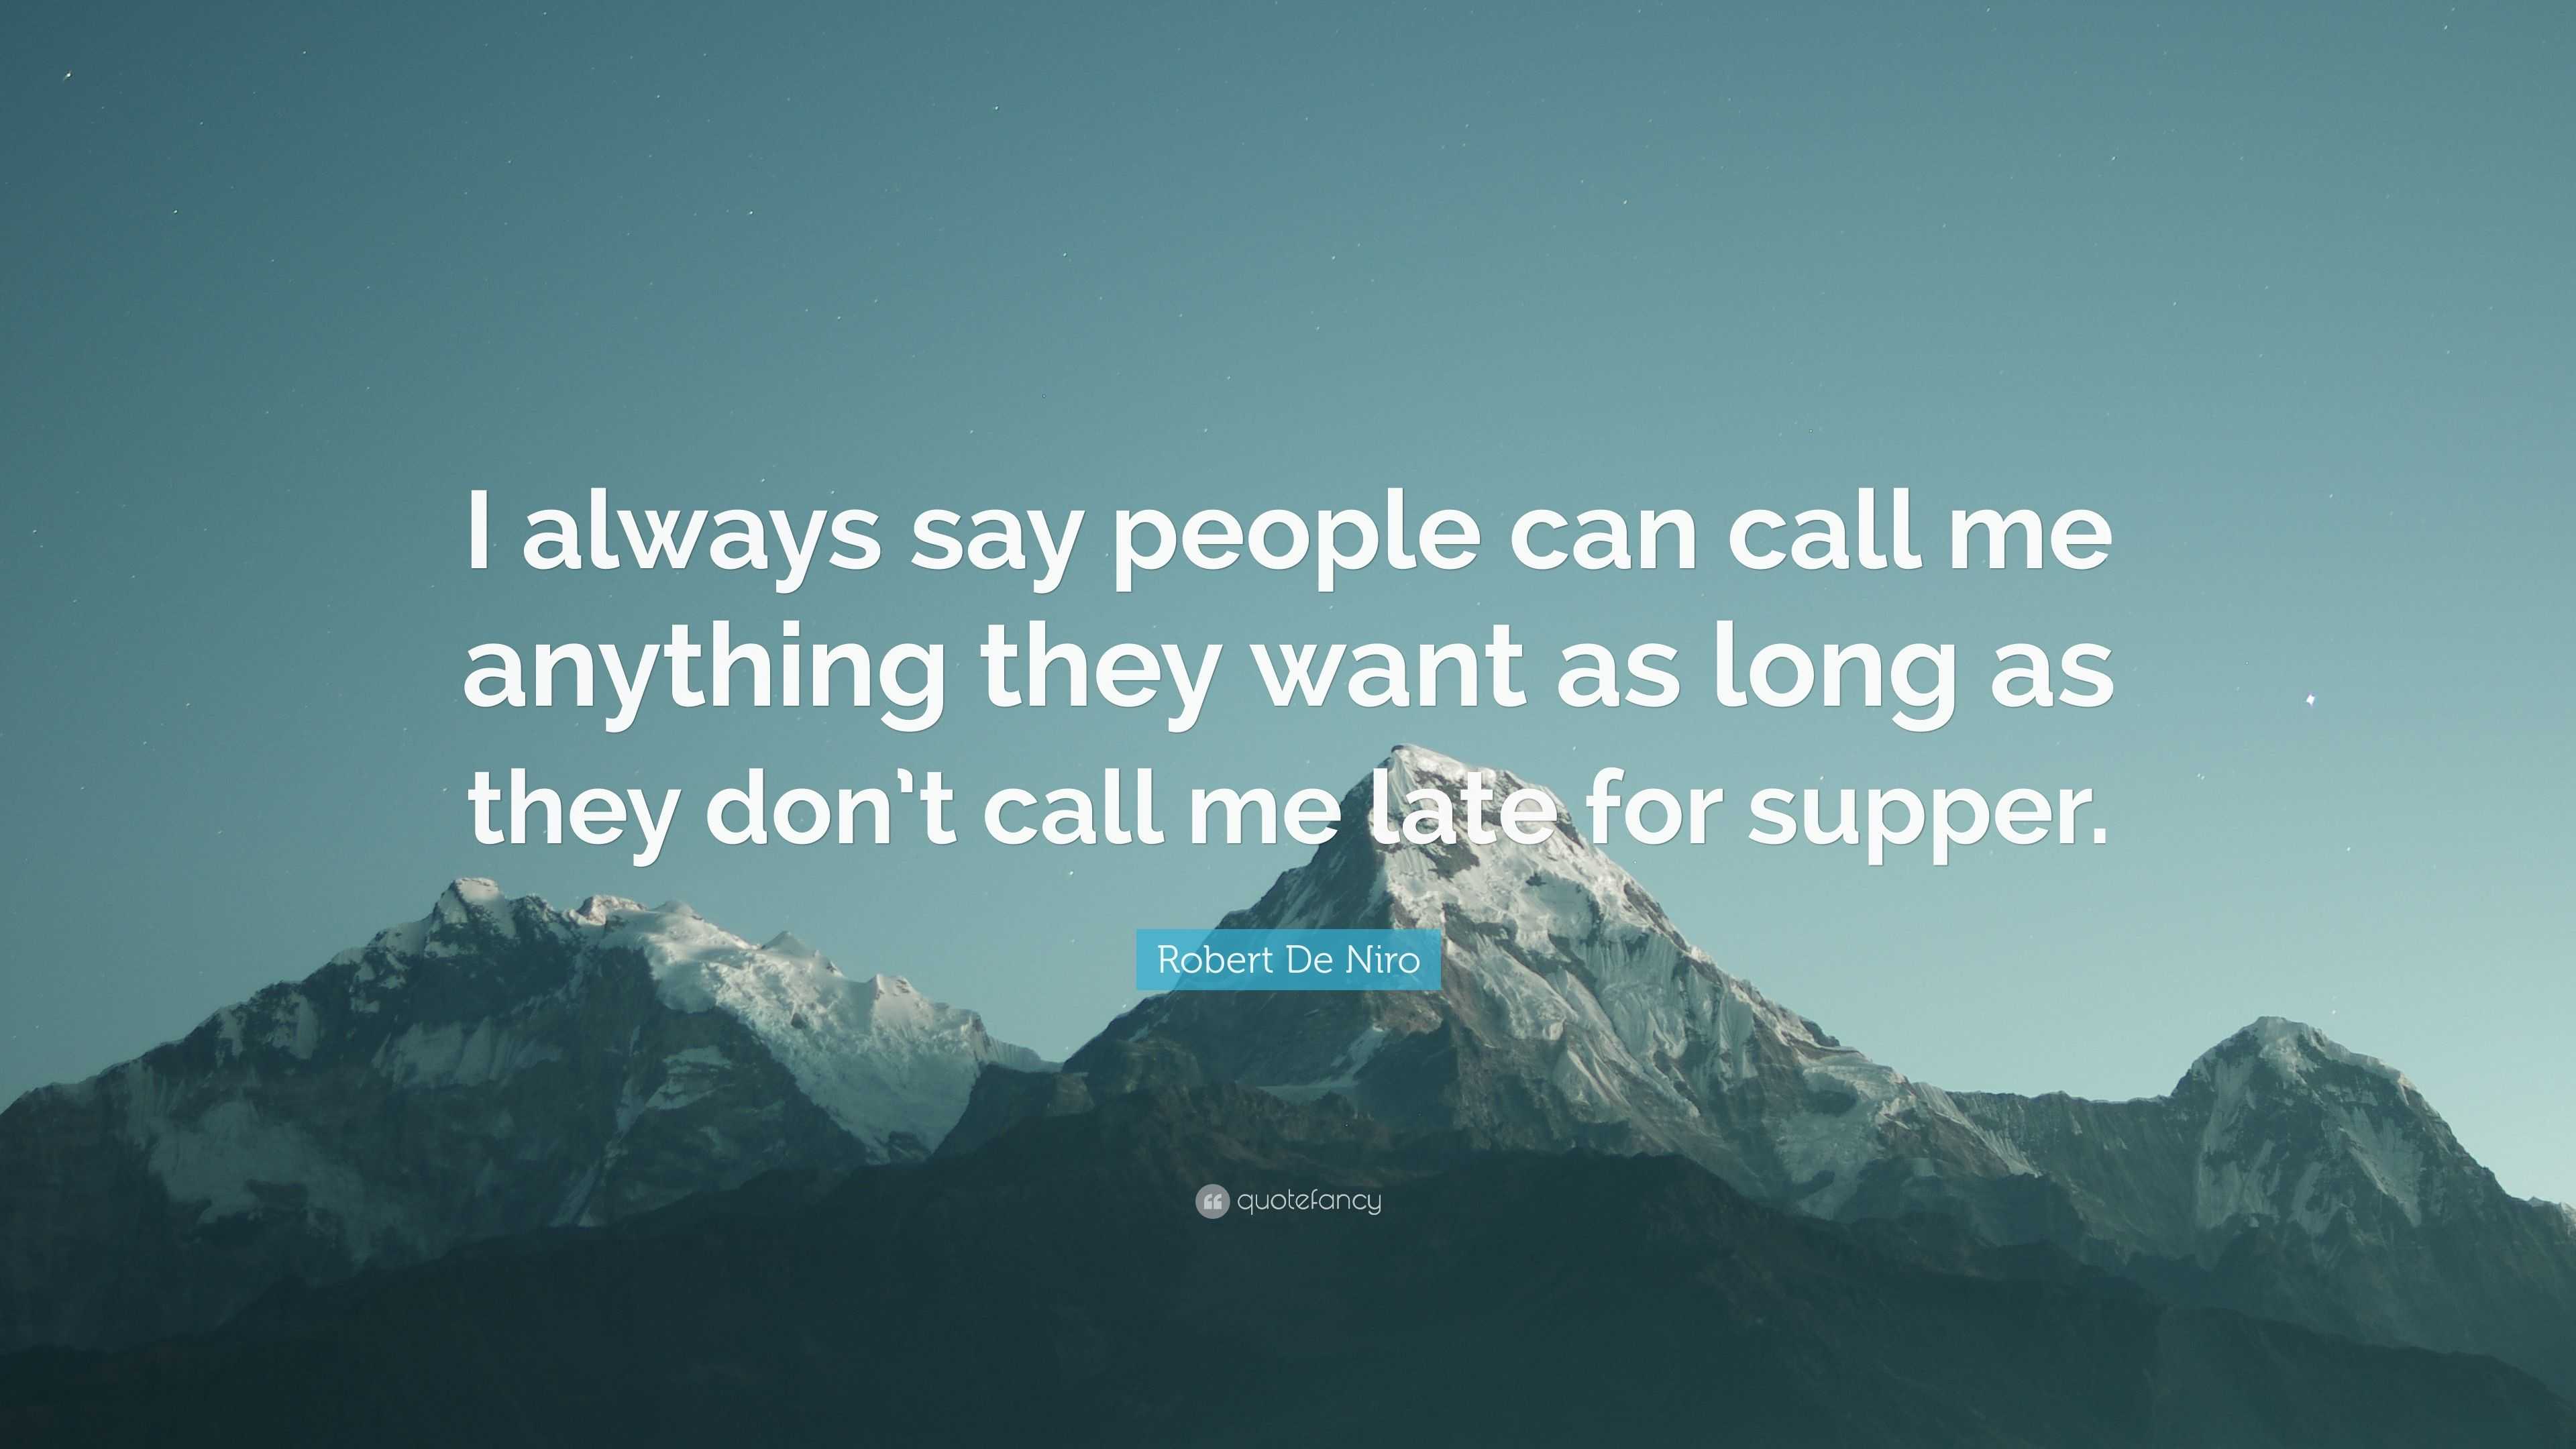 Robert De Niro Quote I Always Say People Can Call Me Anything They Want As Long